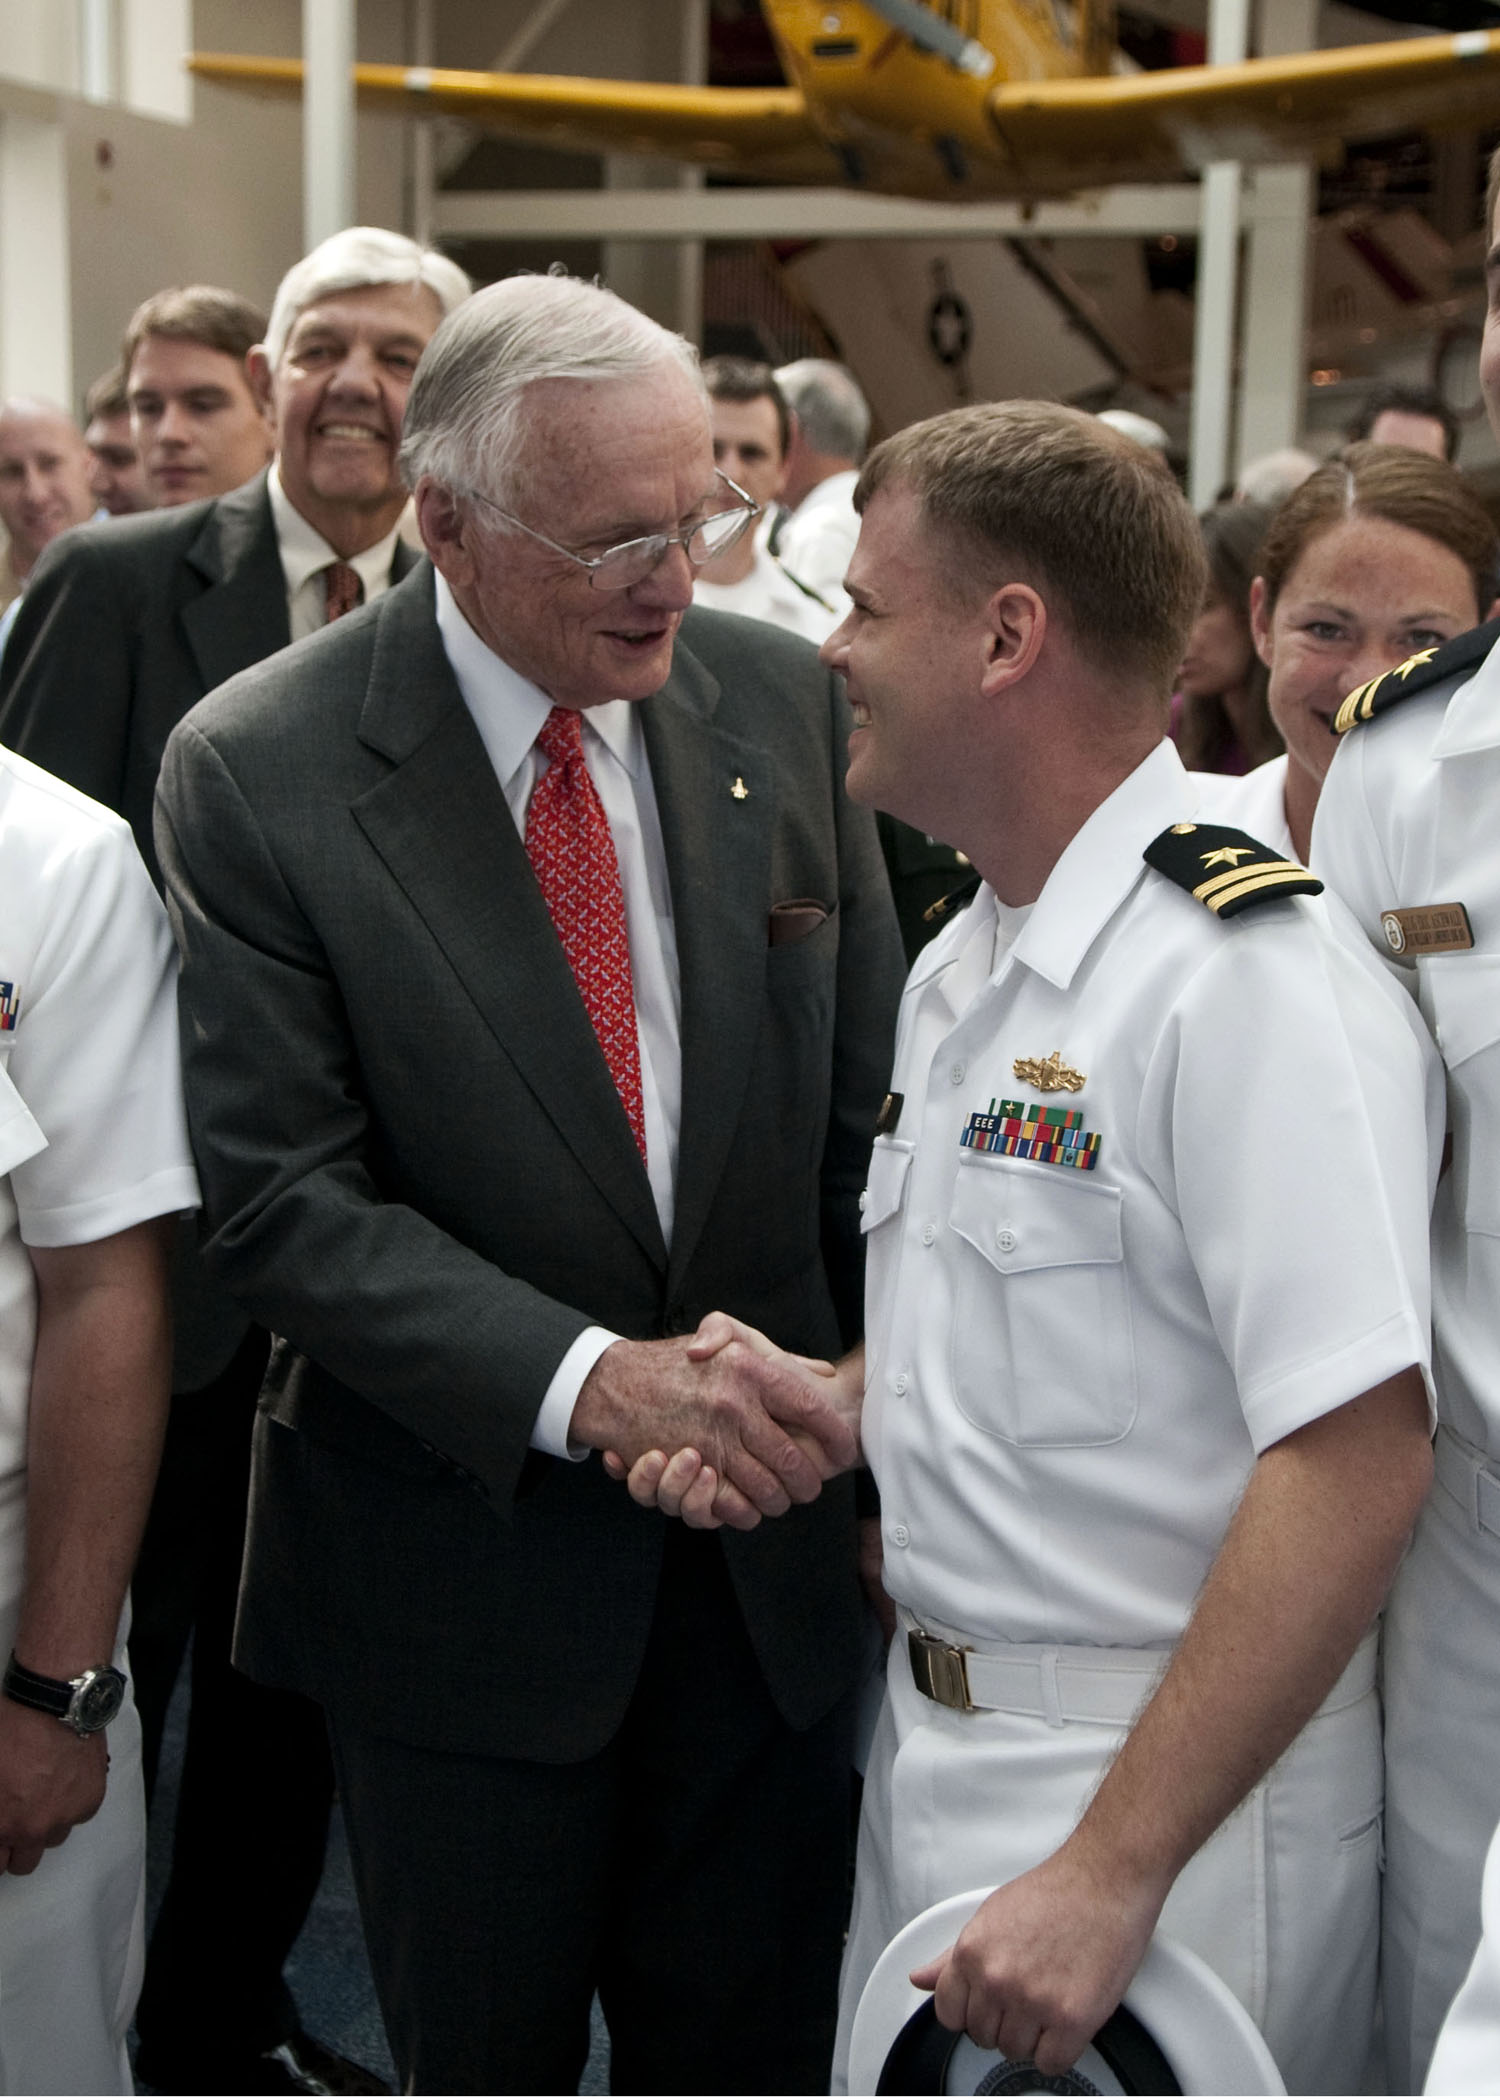 US Navy 100514-N-3852A-004 Former astronaut Neil Armstrong is congratulated by Lt. Gavin Clough, from San Diego, Calif. after Armstrong's induction to the Naval Aviation Hall of Honor in Pensacola, Fla